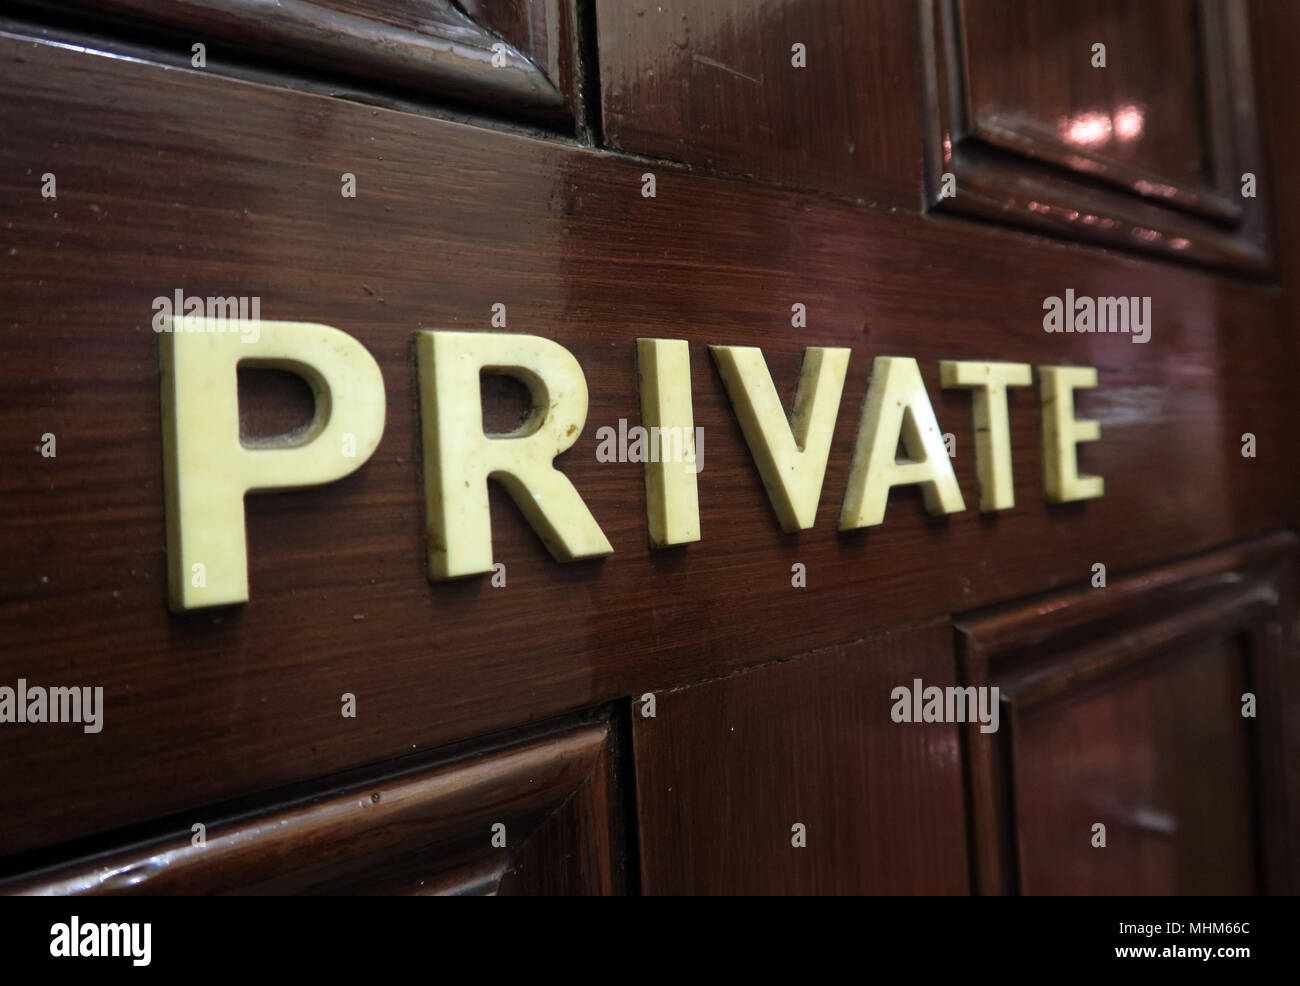 Private in letters, on a brown wooden door - keeping personal and commercial data private Stock Photo